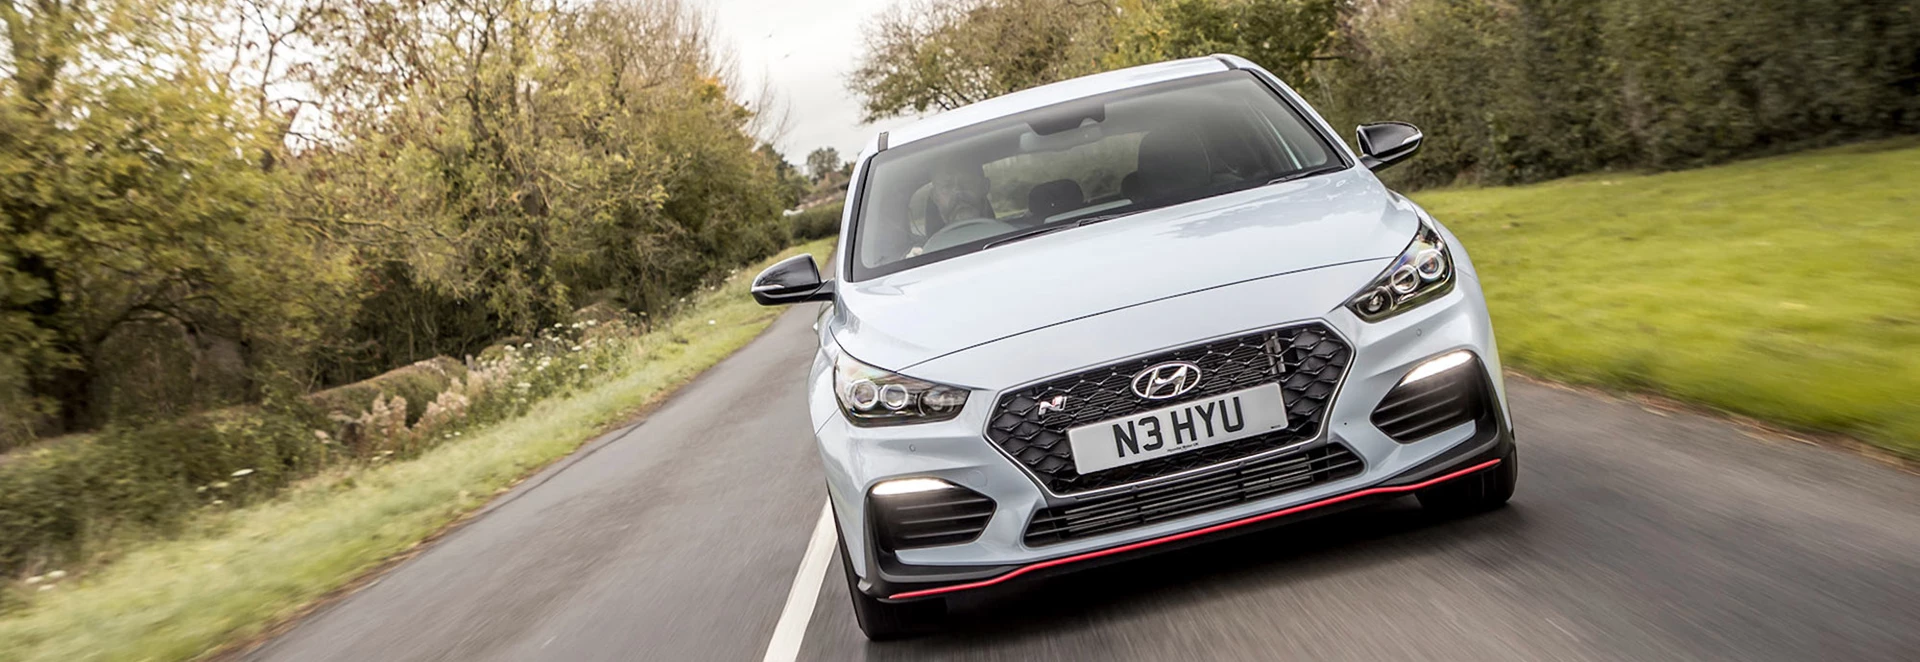 Buyers’ guide to the Hyundai i30 N